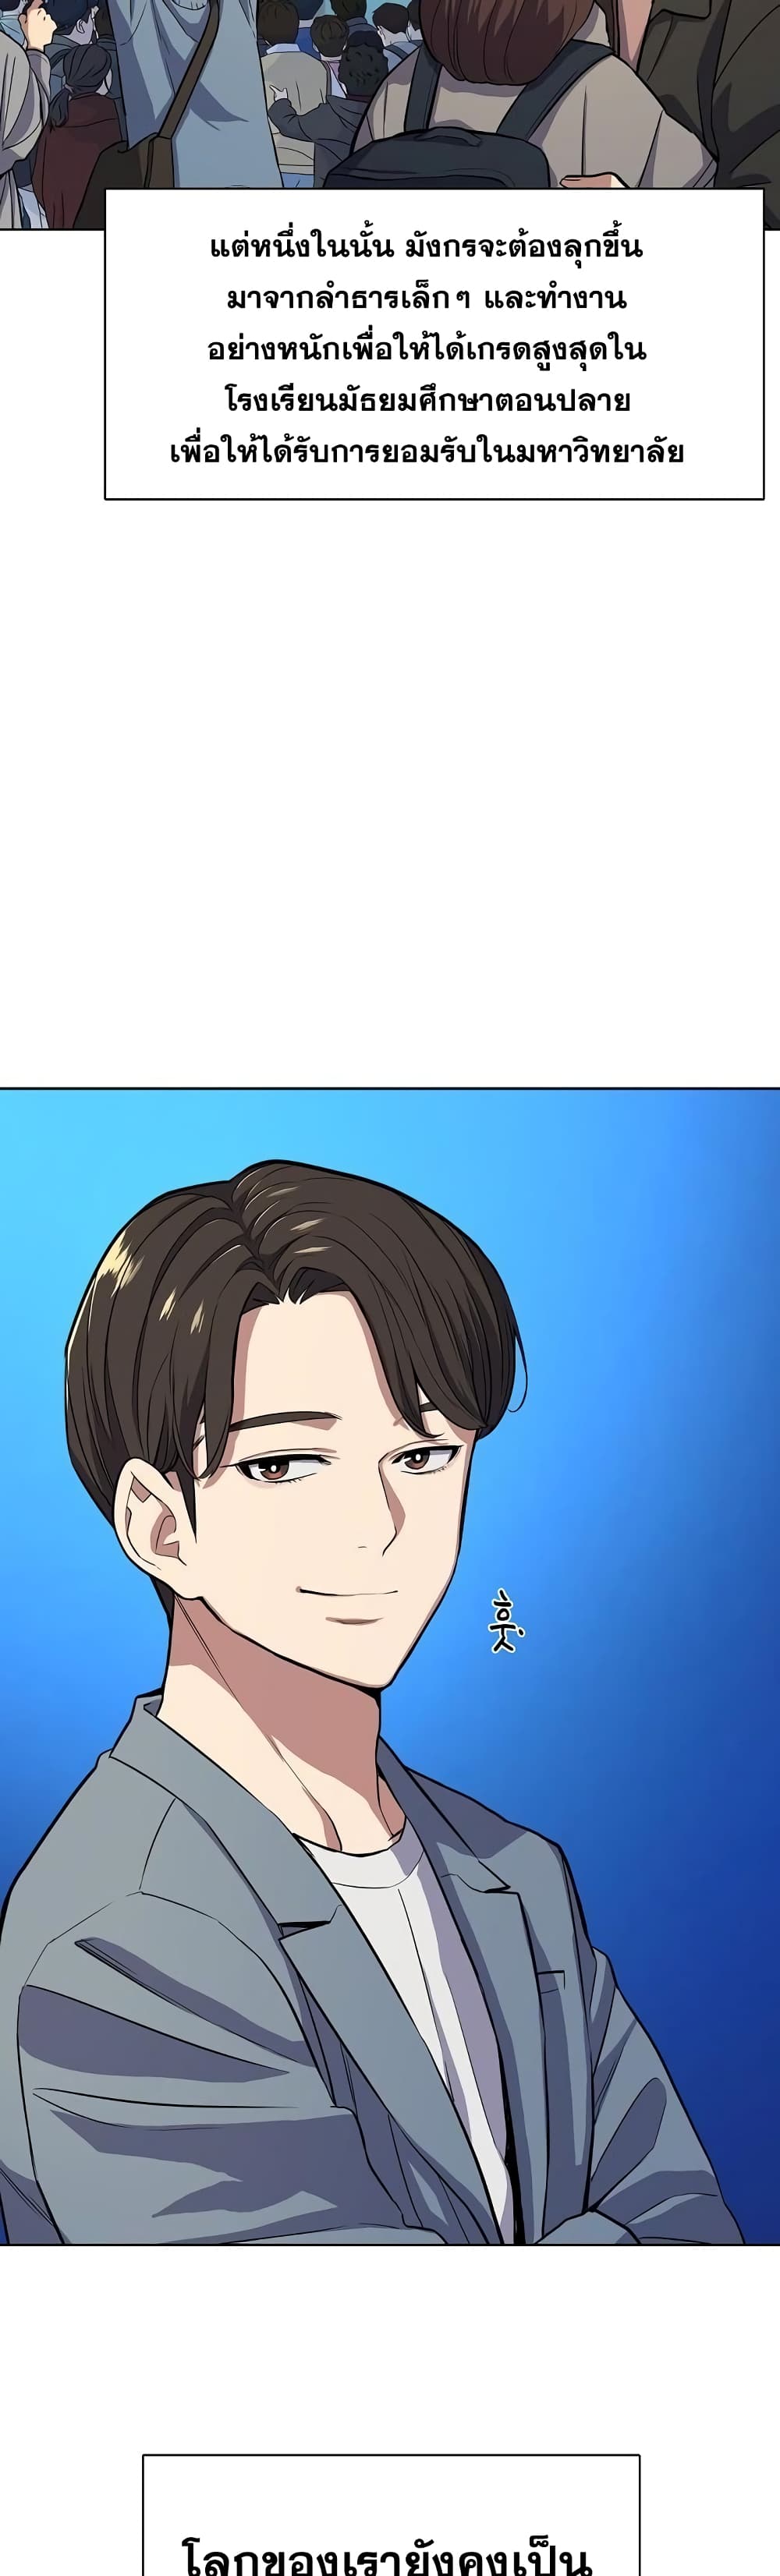 The Chaebeol’s Youngest Son 19-19